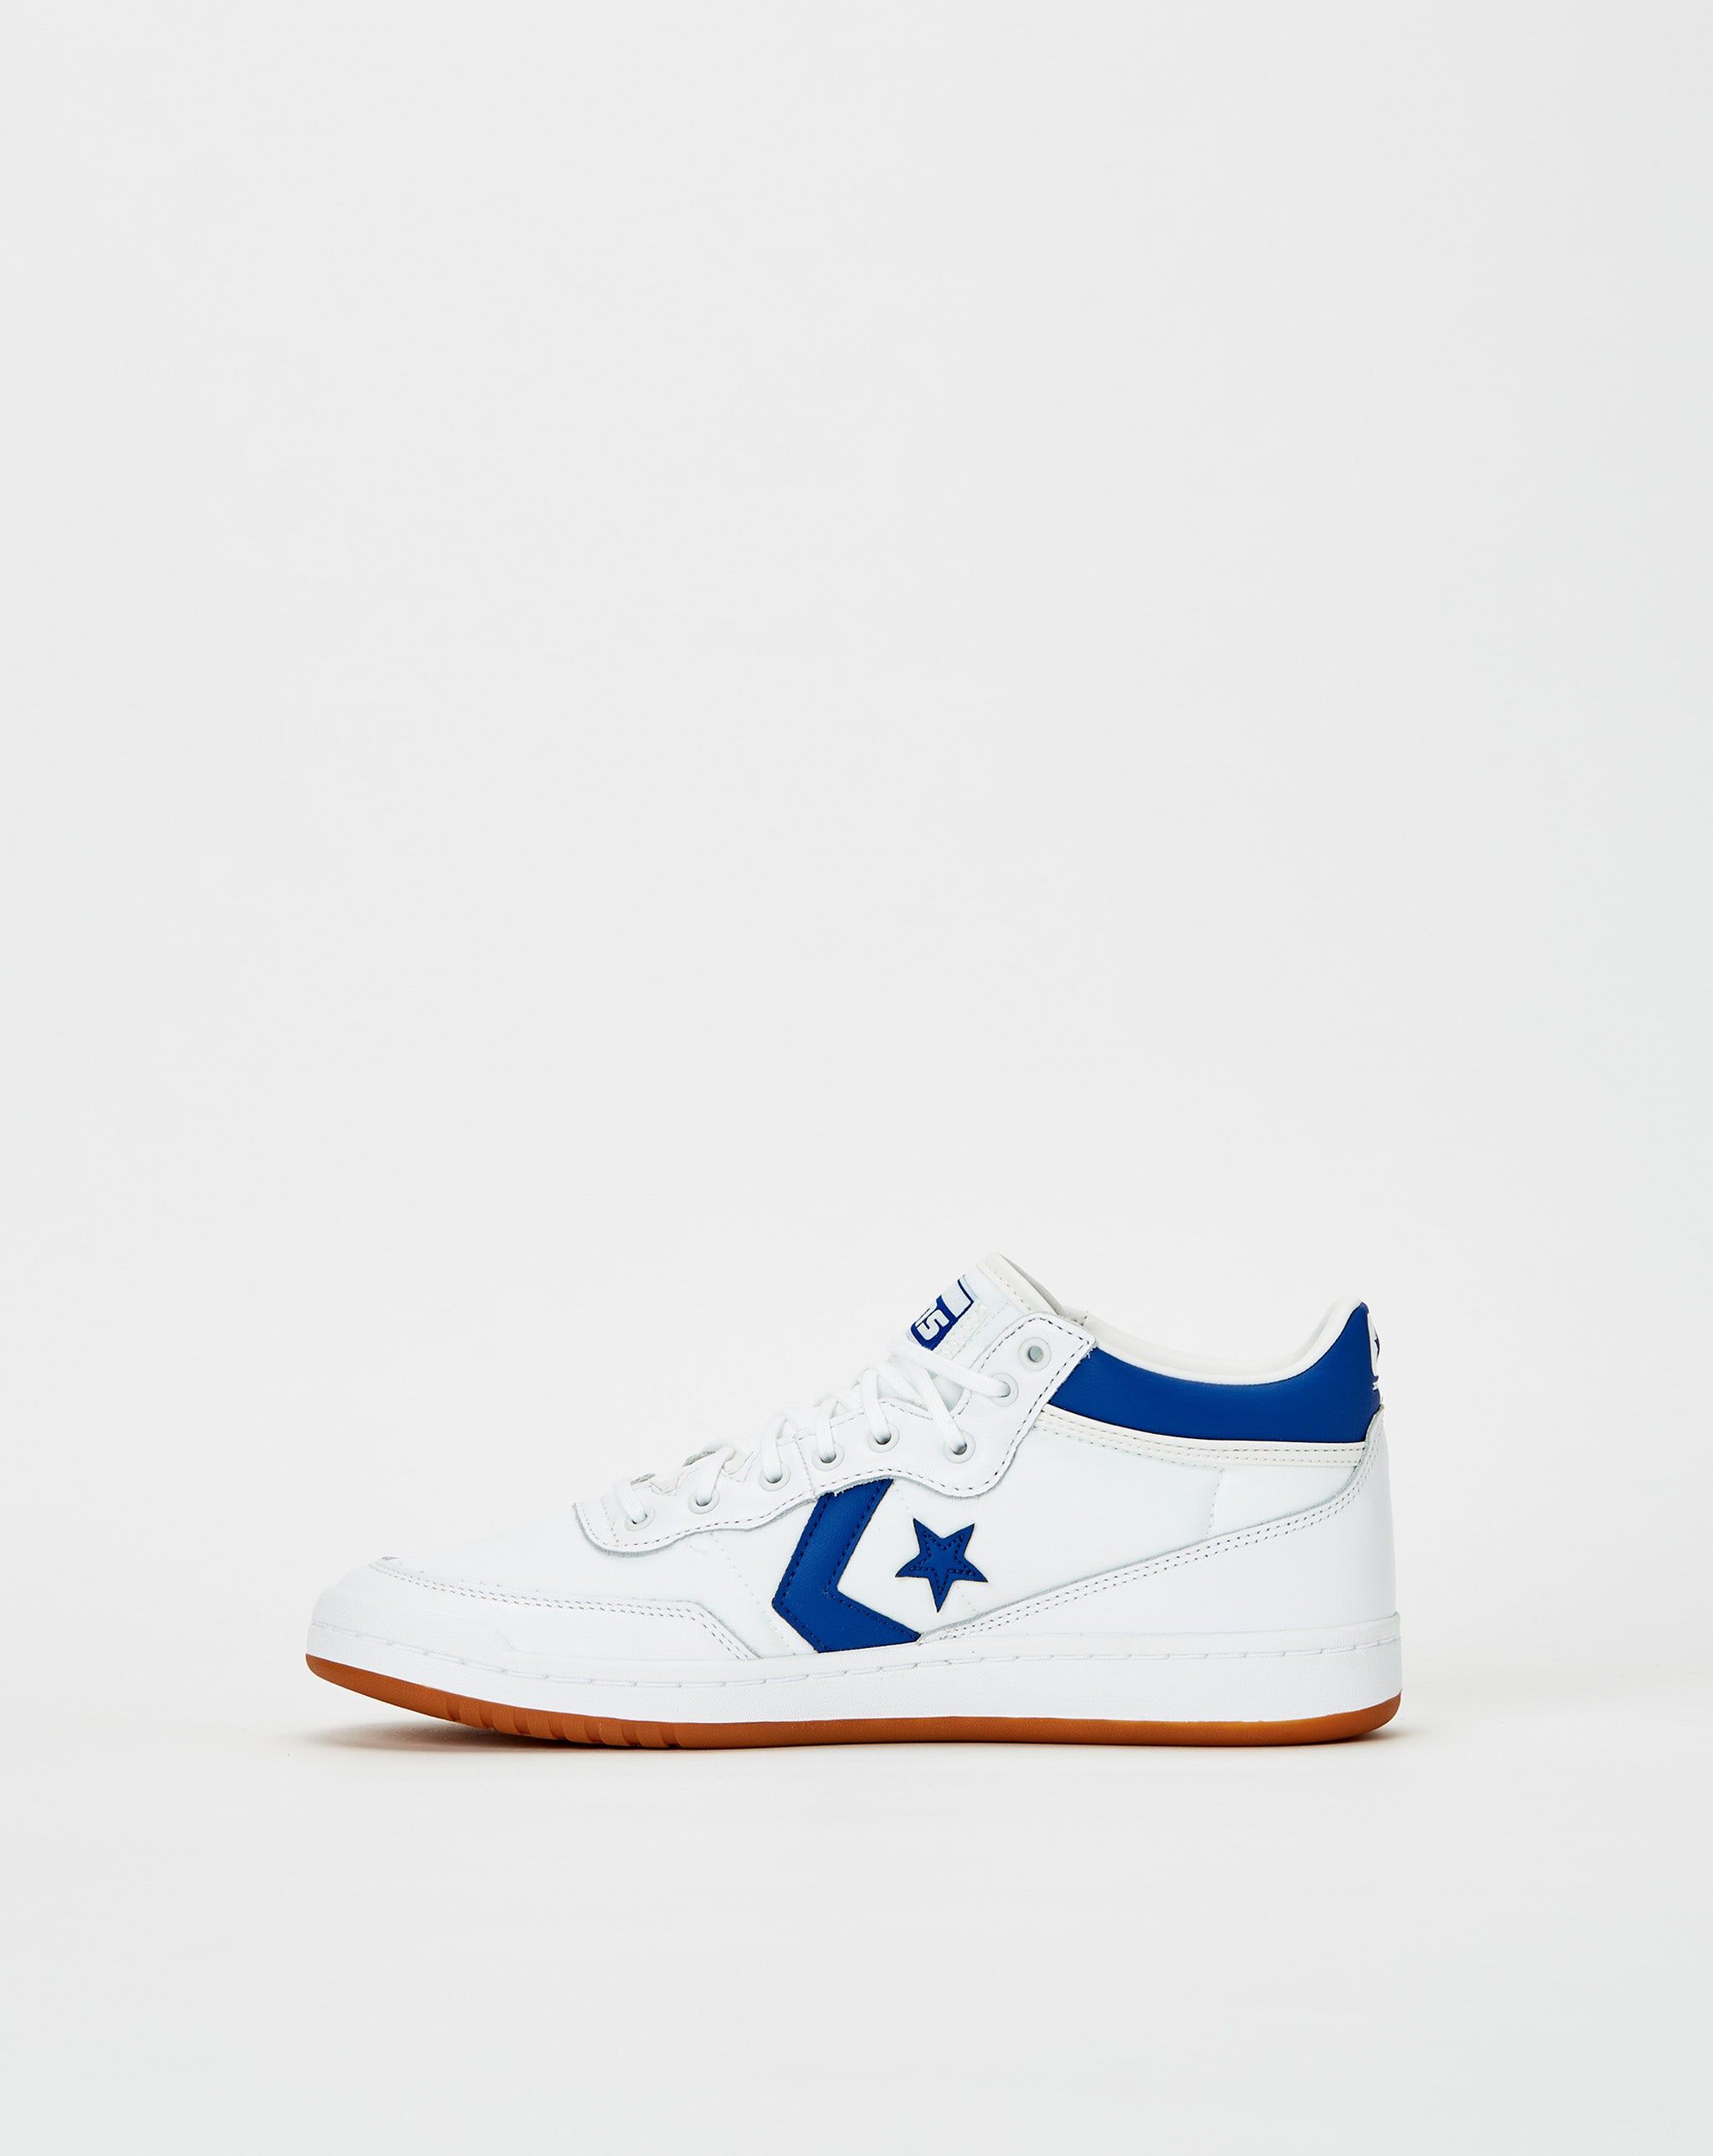 All Star Ox Unisex Shoes Optic White